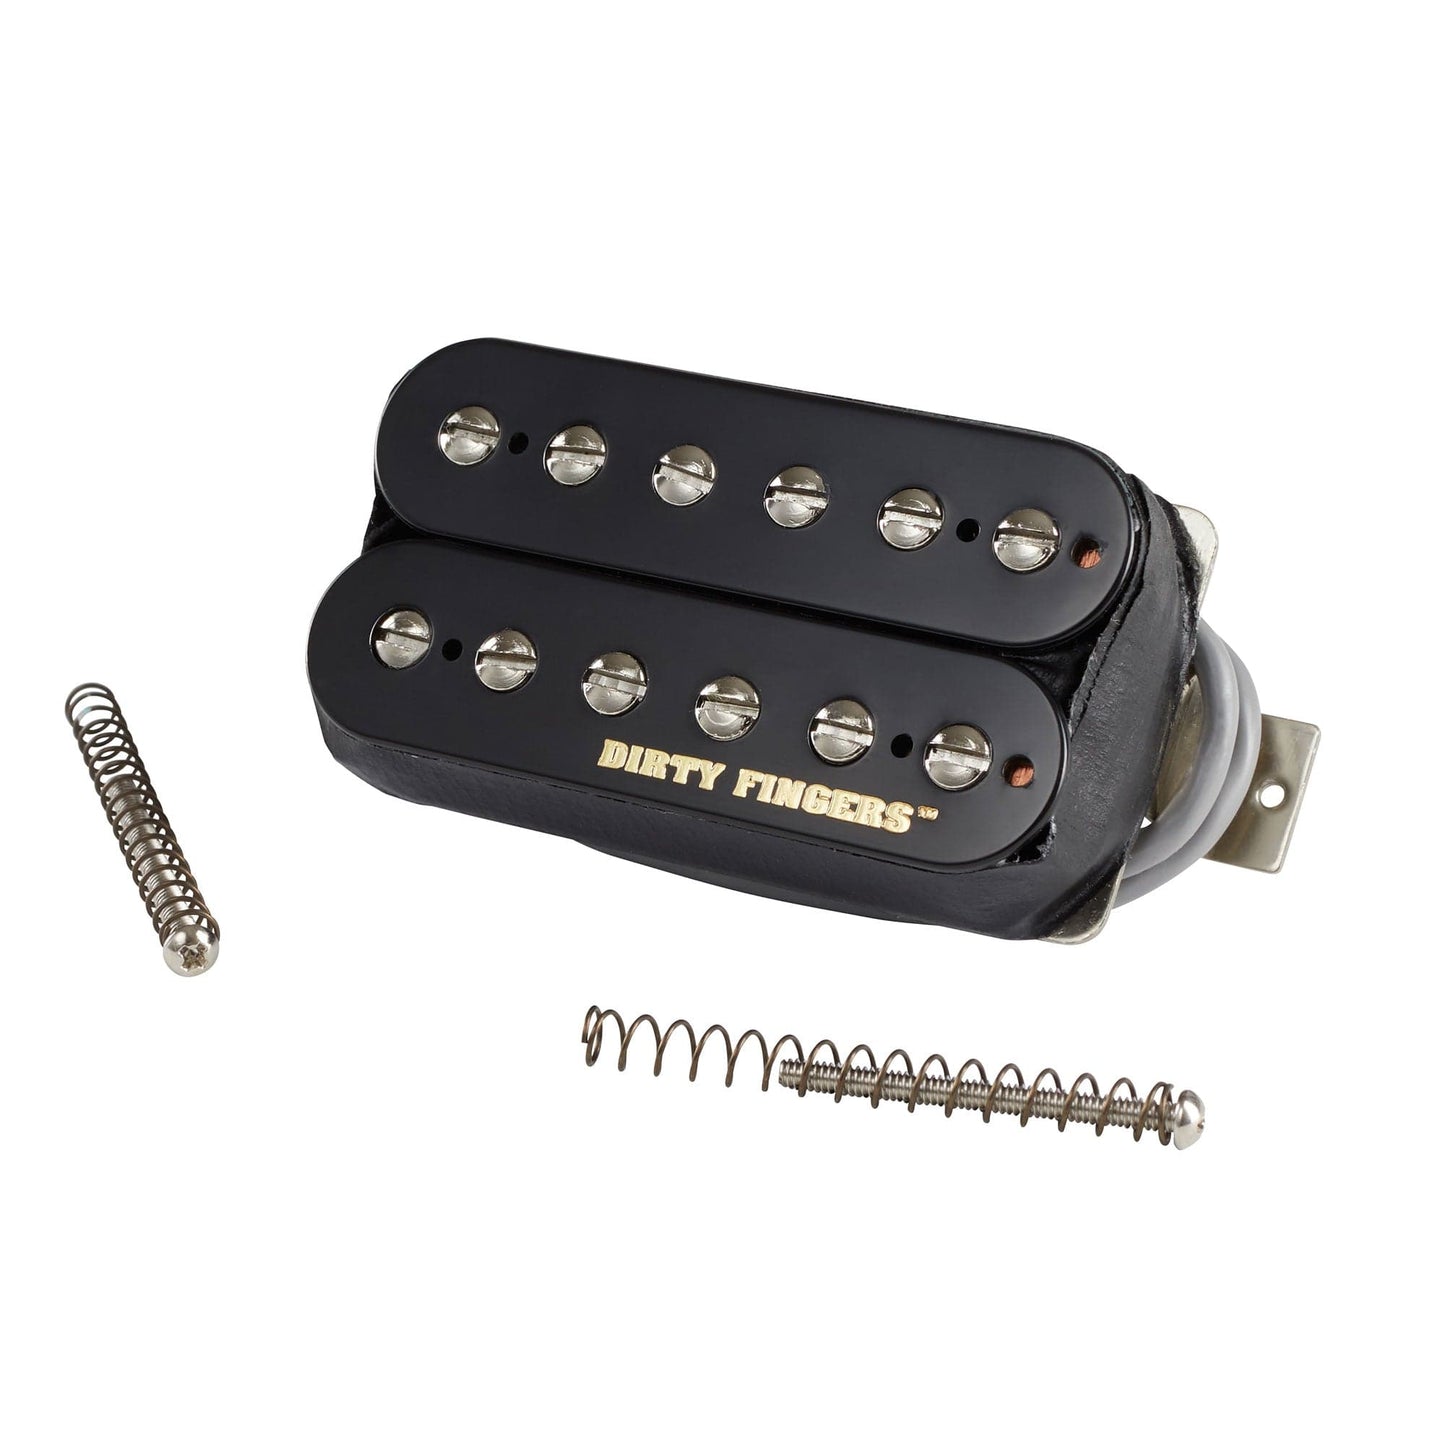 Gibson Dirty Fingers SM 4-Conductor Humbucker Double Black Parts / Guitar Pickups